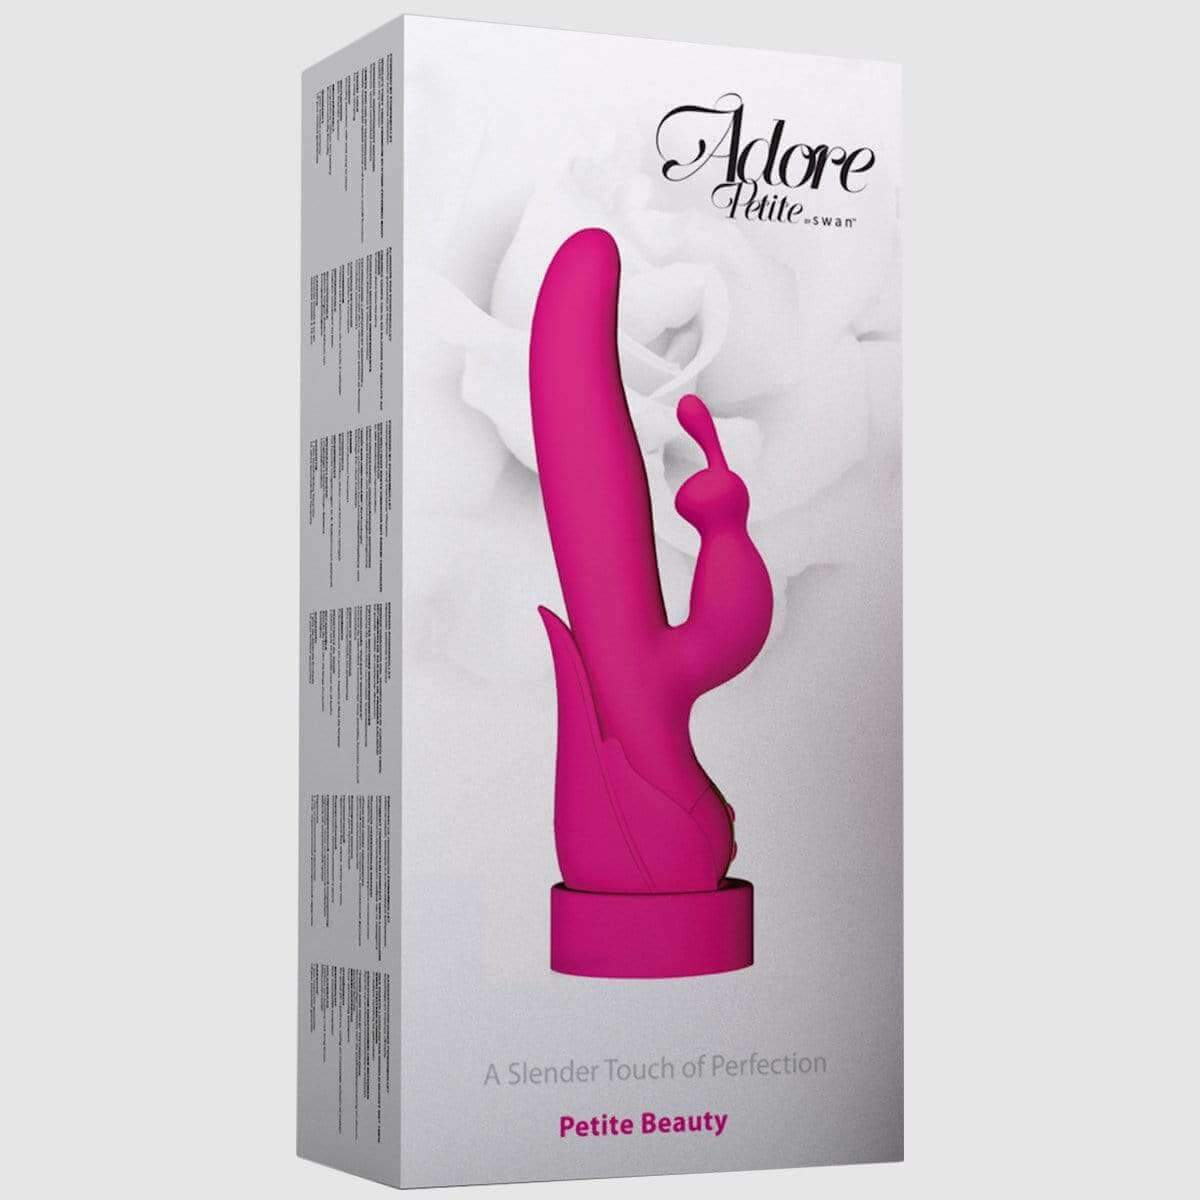 Adore Petite Beauty - Thorn & Feather Sex Toy Canada